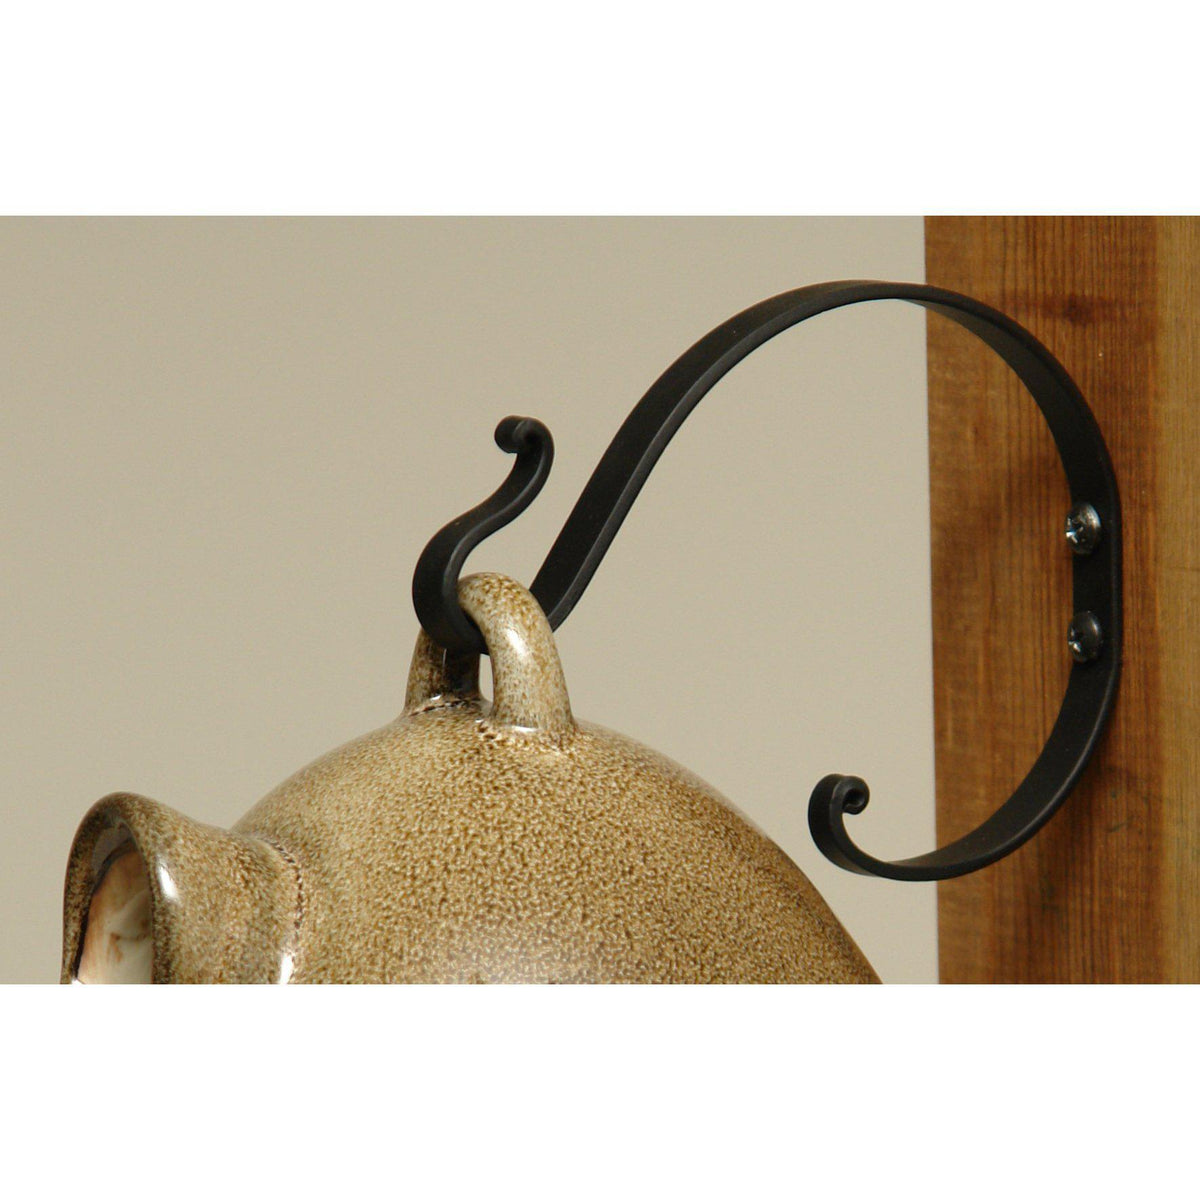 Forged Steel Hook old, from Byer of Maine